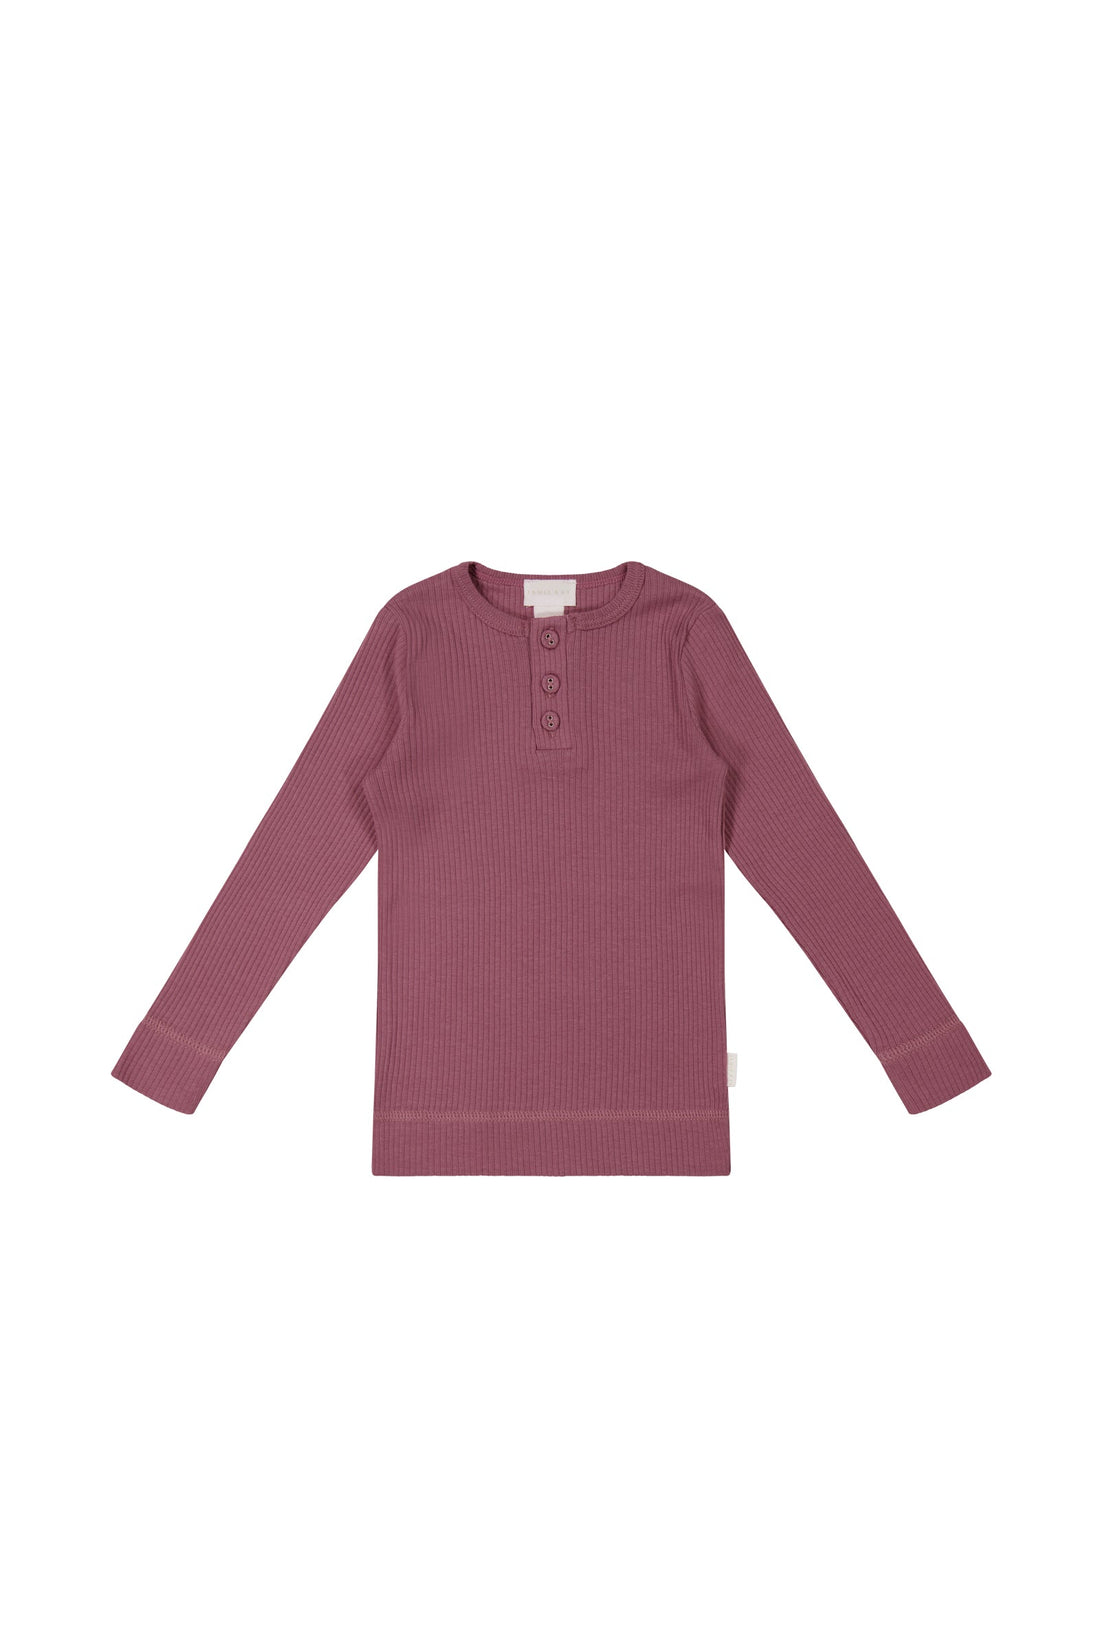 Organic Cotton Modal Long Sleeve Henley - Heather Childrens Top from Jamie Kay USA